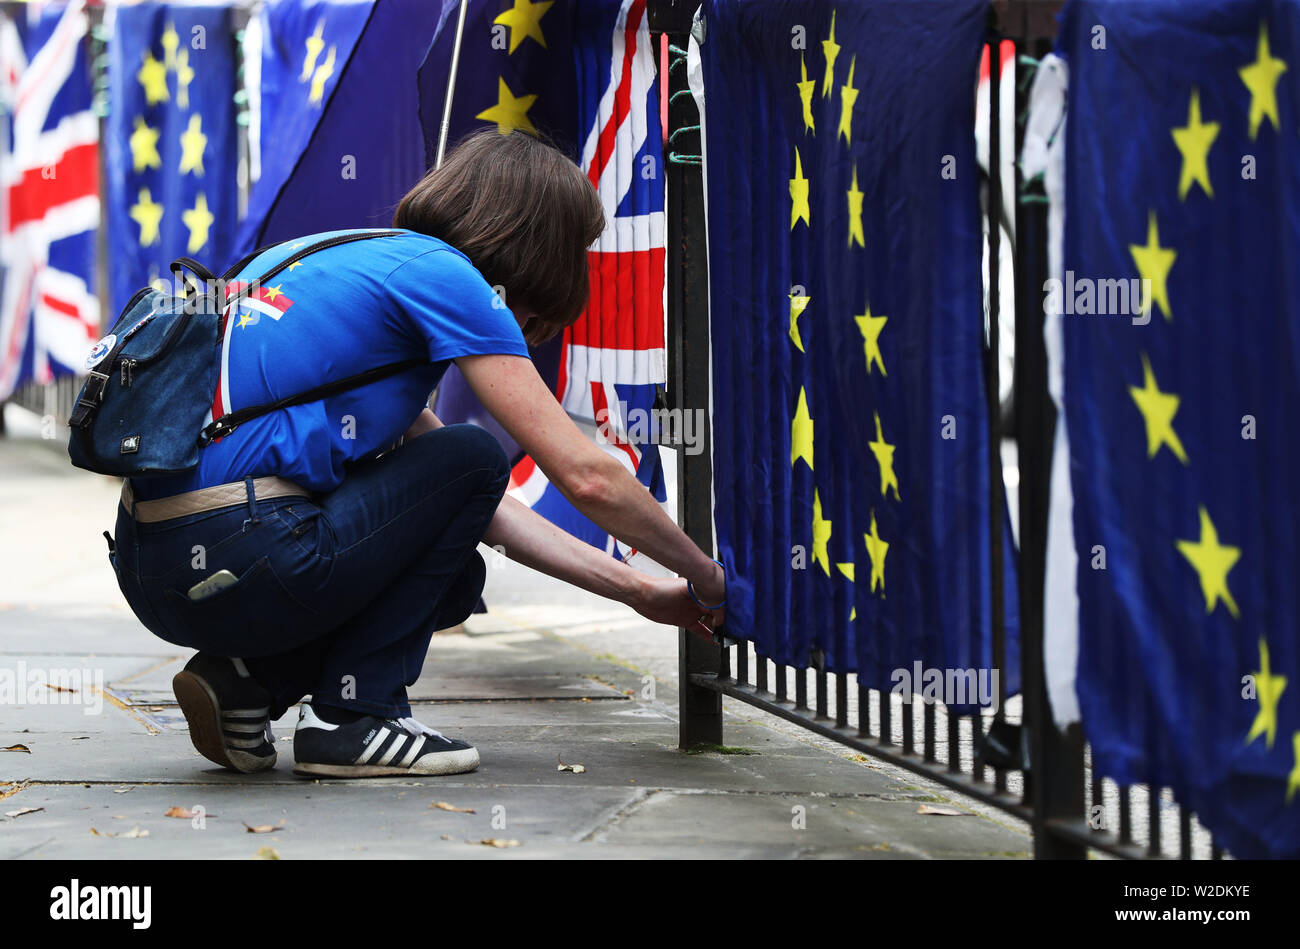 A pro EU activist affixes flags of the European Union and Great Britain together along railings near the Palace of Westminster. Stock Photo